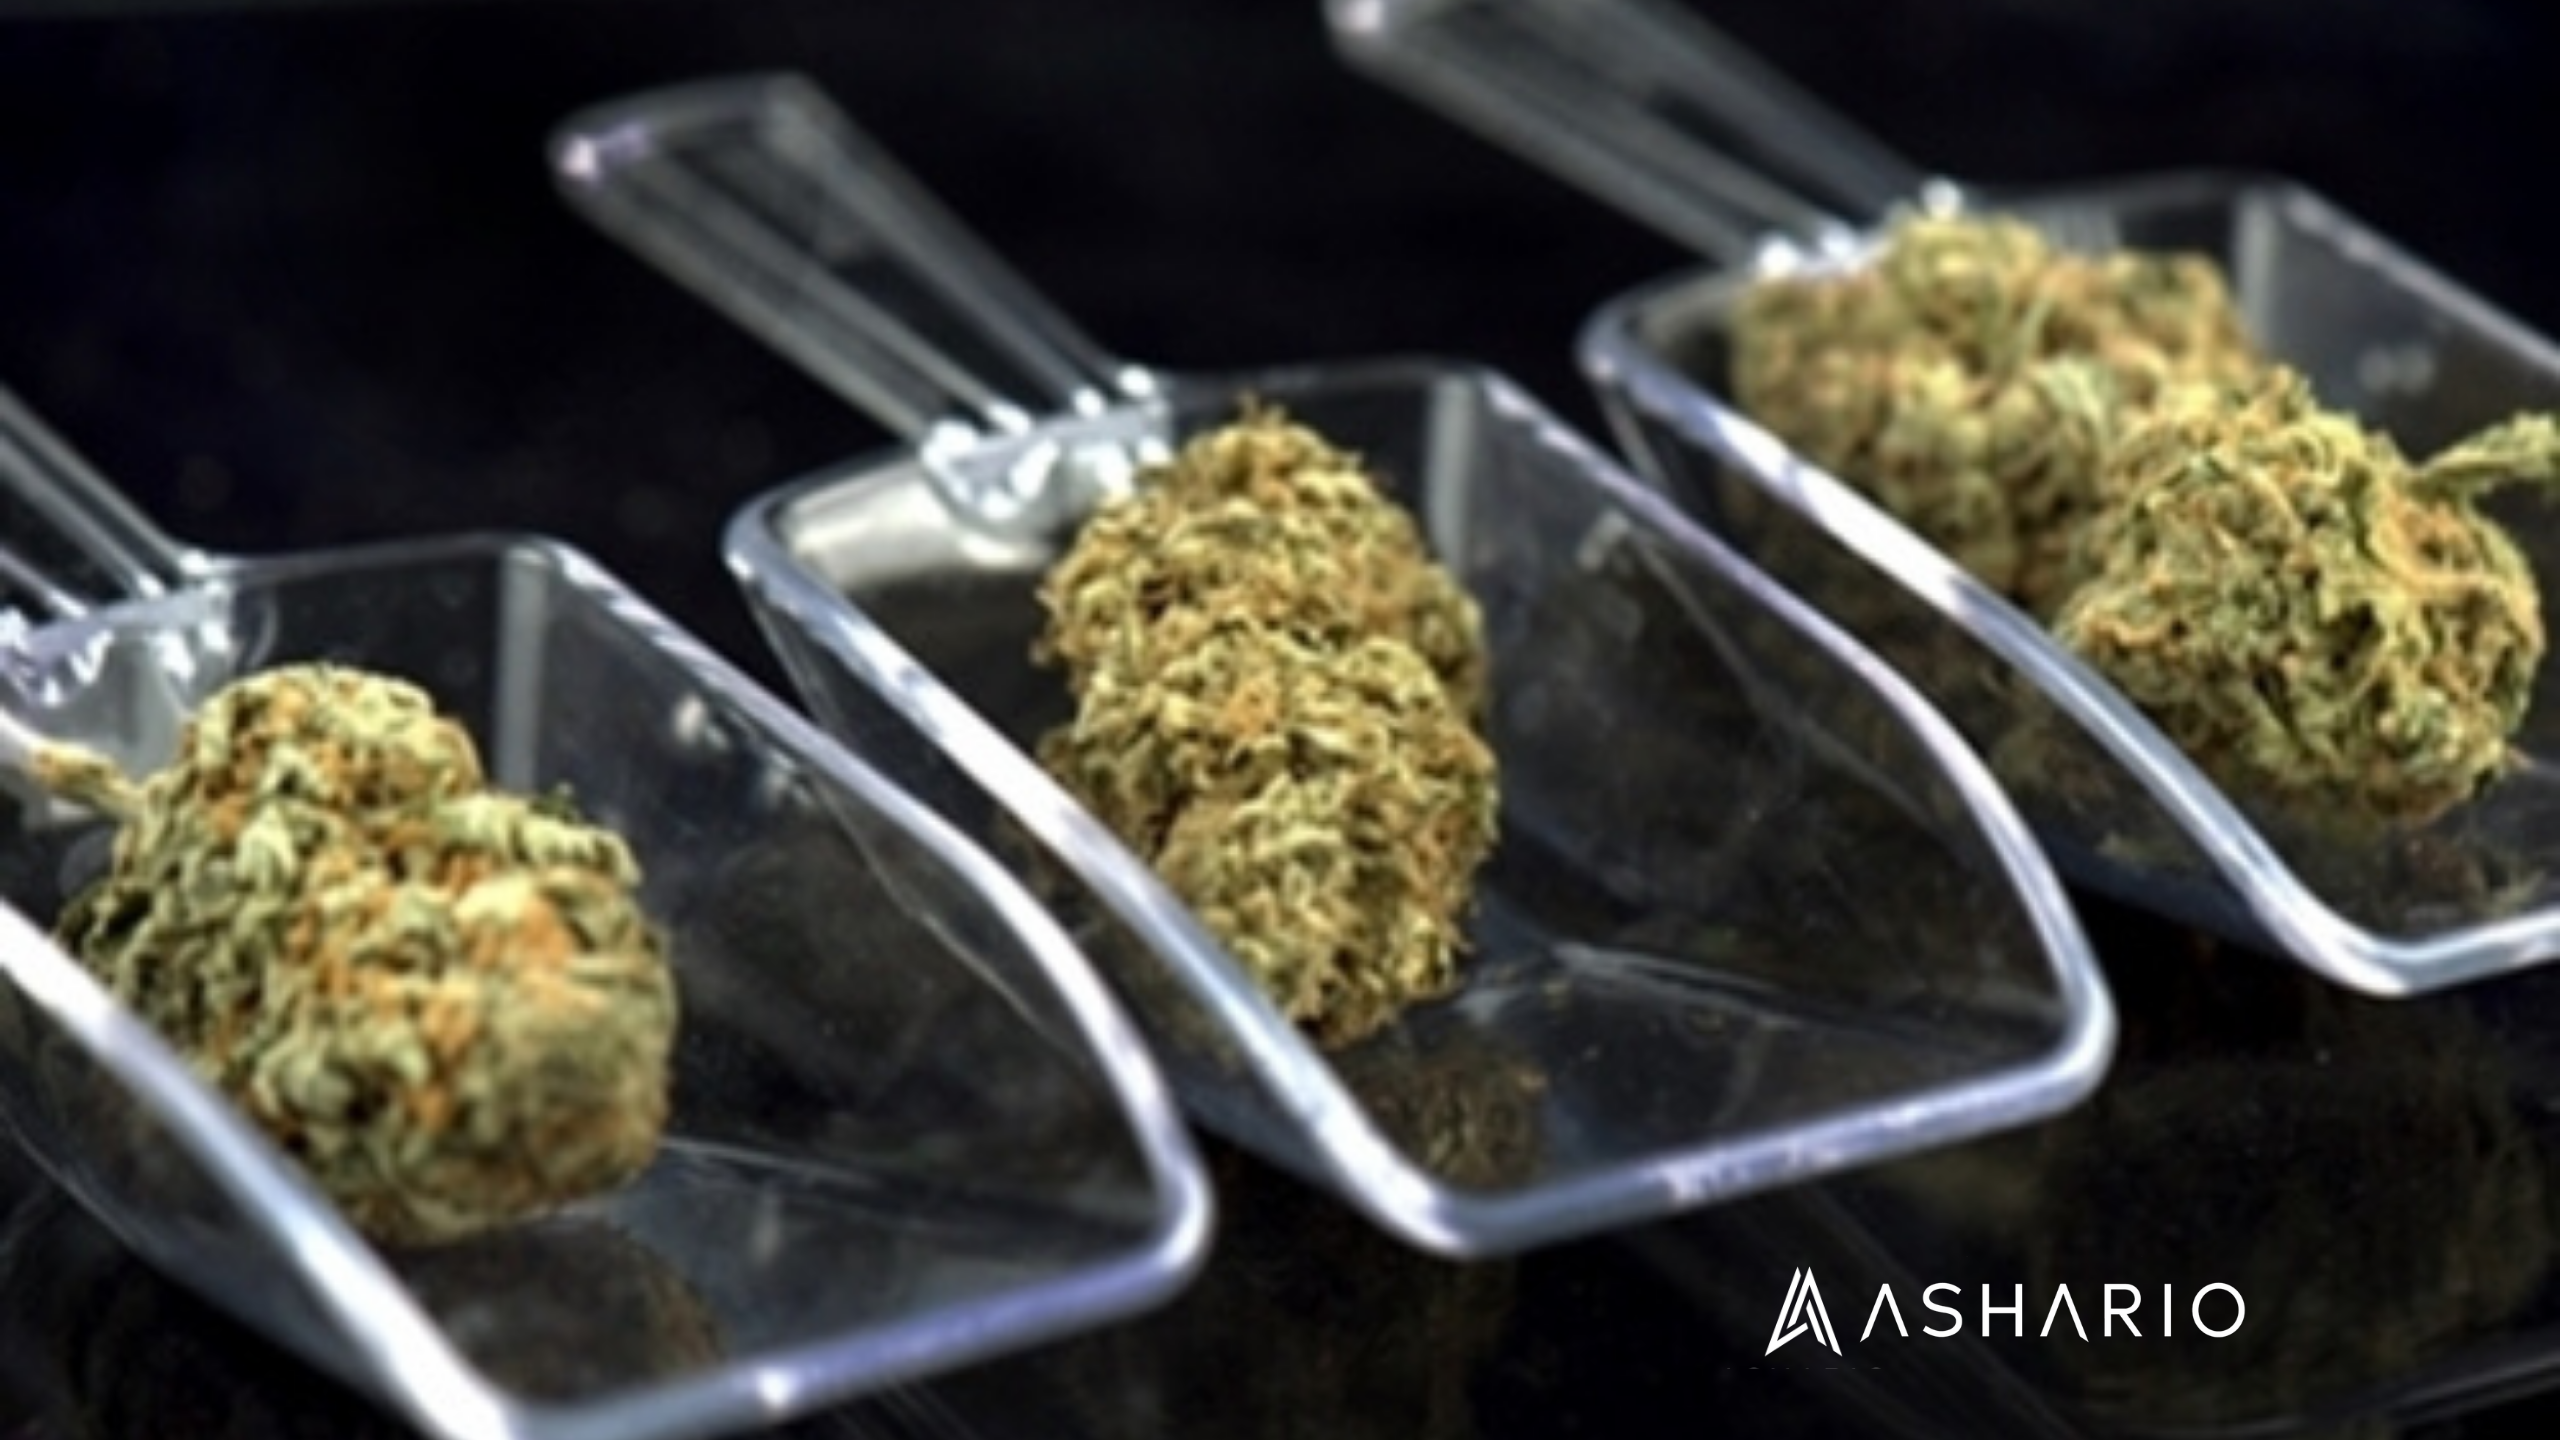 Navigate the world of cannabis dosage with Ashario Cannabis's insightful exploration of safe consumption practices. Learn why patience is key when it comes to cannabis, as rushing dosage can lead to unwanted effects.